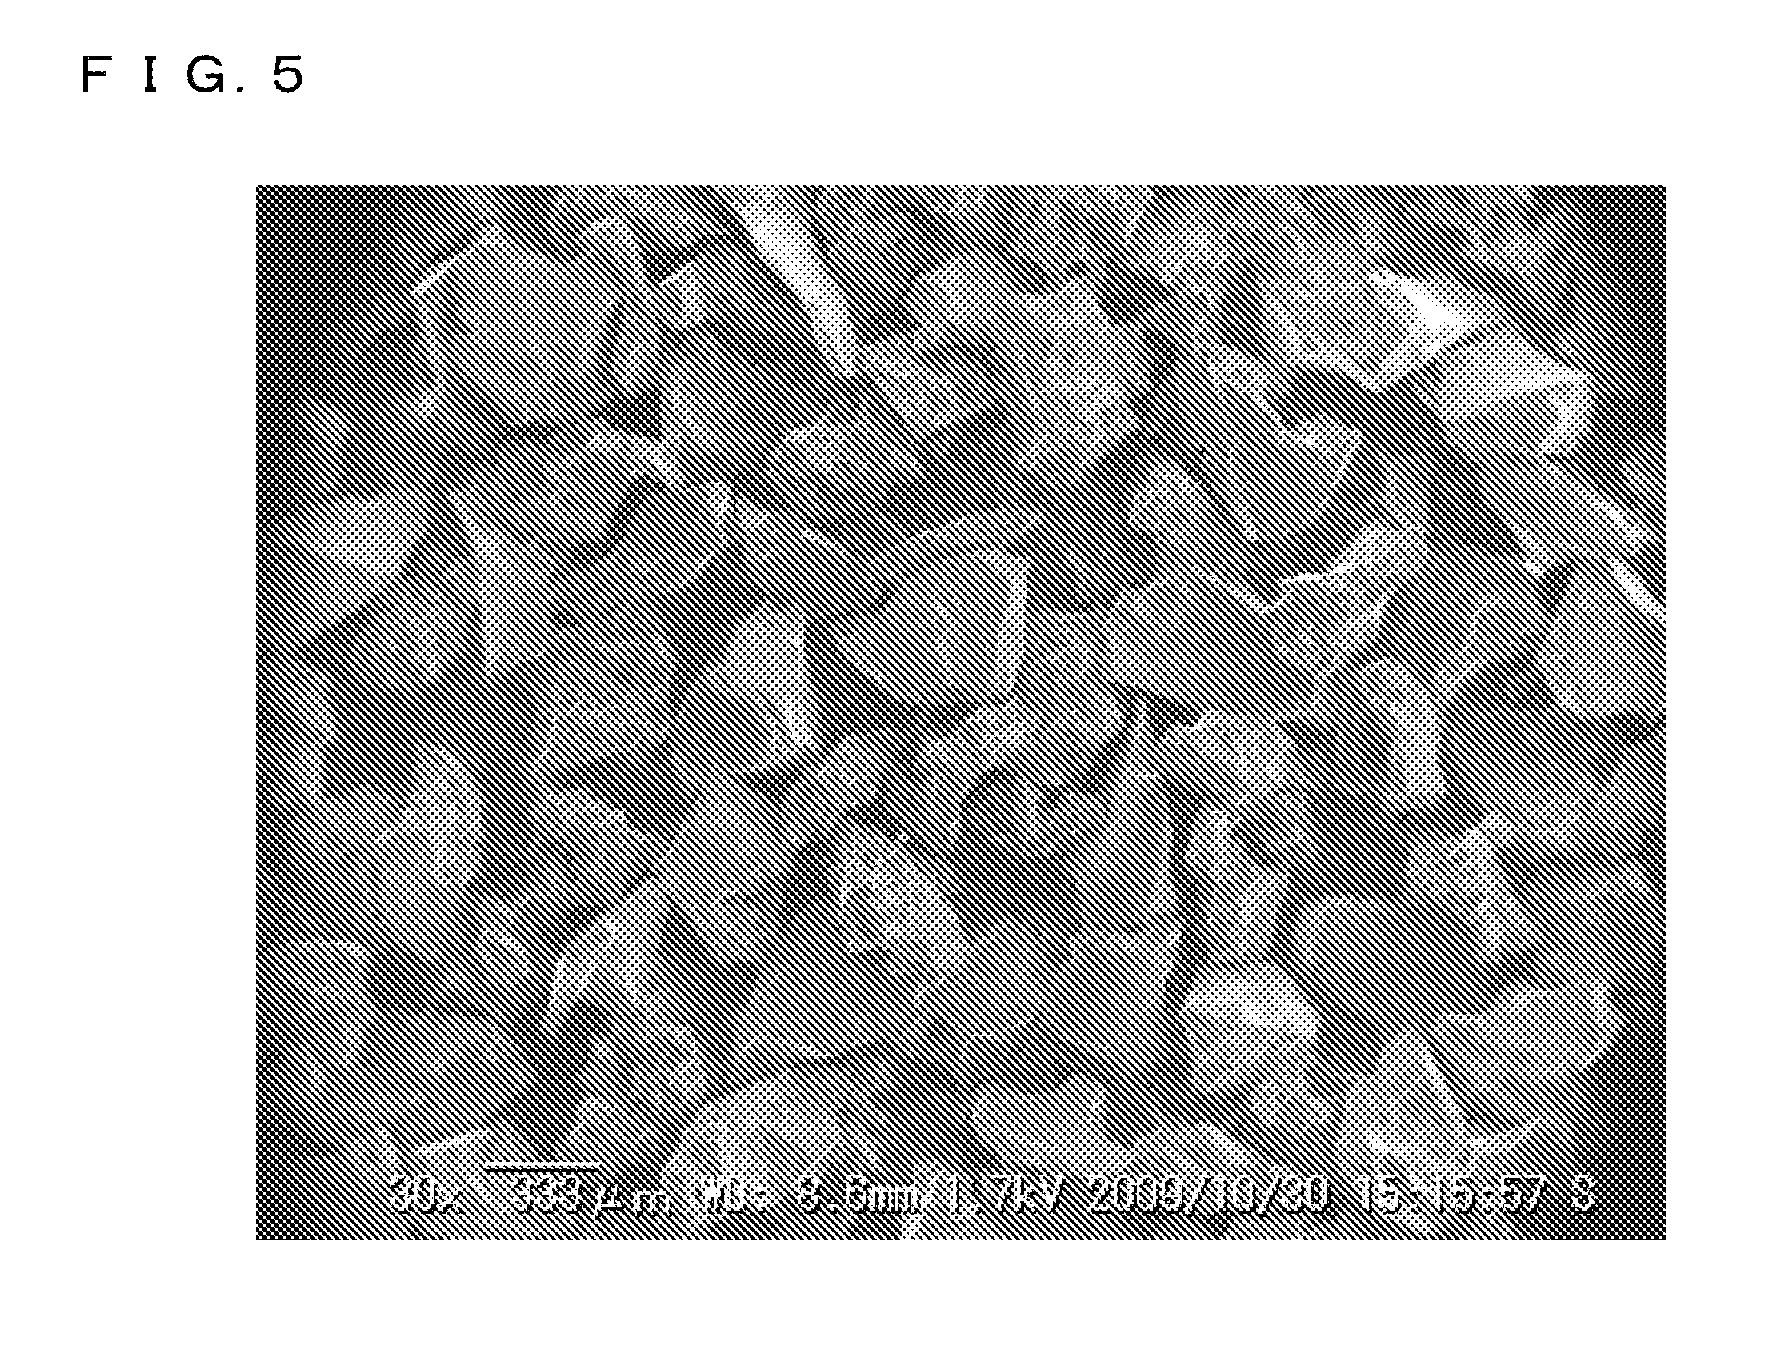 Polyacrylic water-absorbent resin powder and method for producing the same